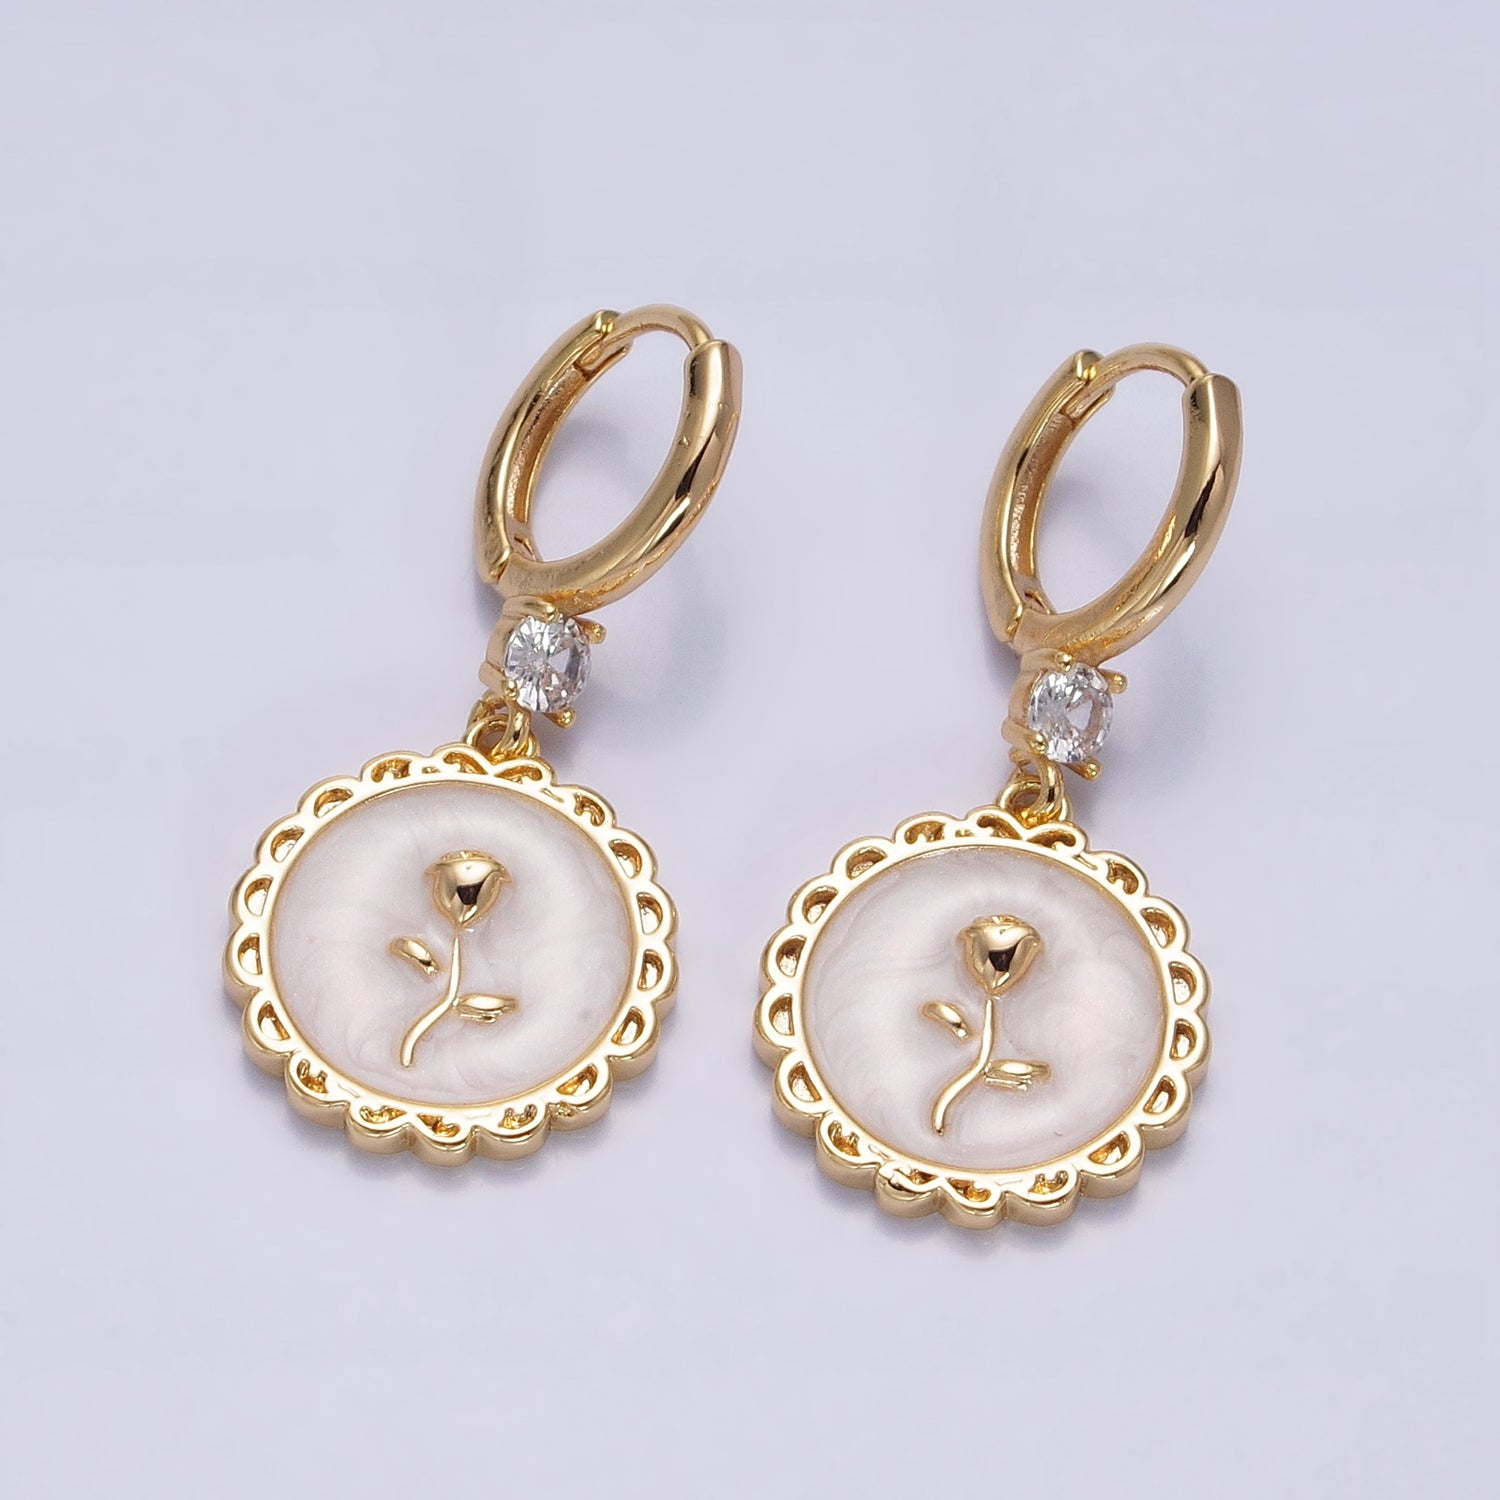 16K Gold Filled White, Pink, Blue Sparkly Enamel Rose Flower Round CZ Drop Huggie Earrings | AB1469 - AB1471 - DLUXCA